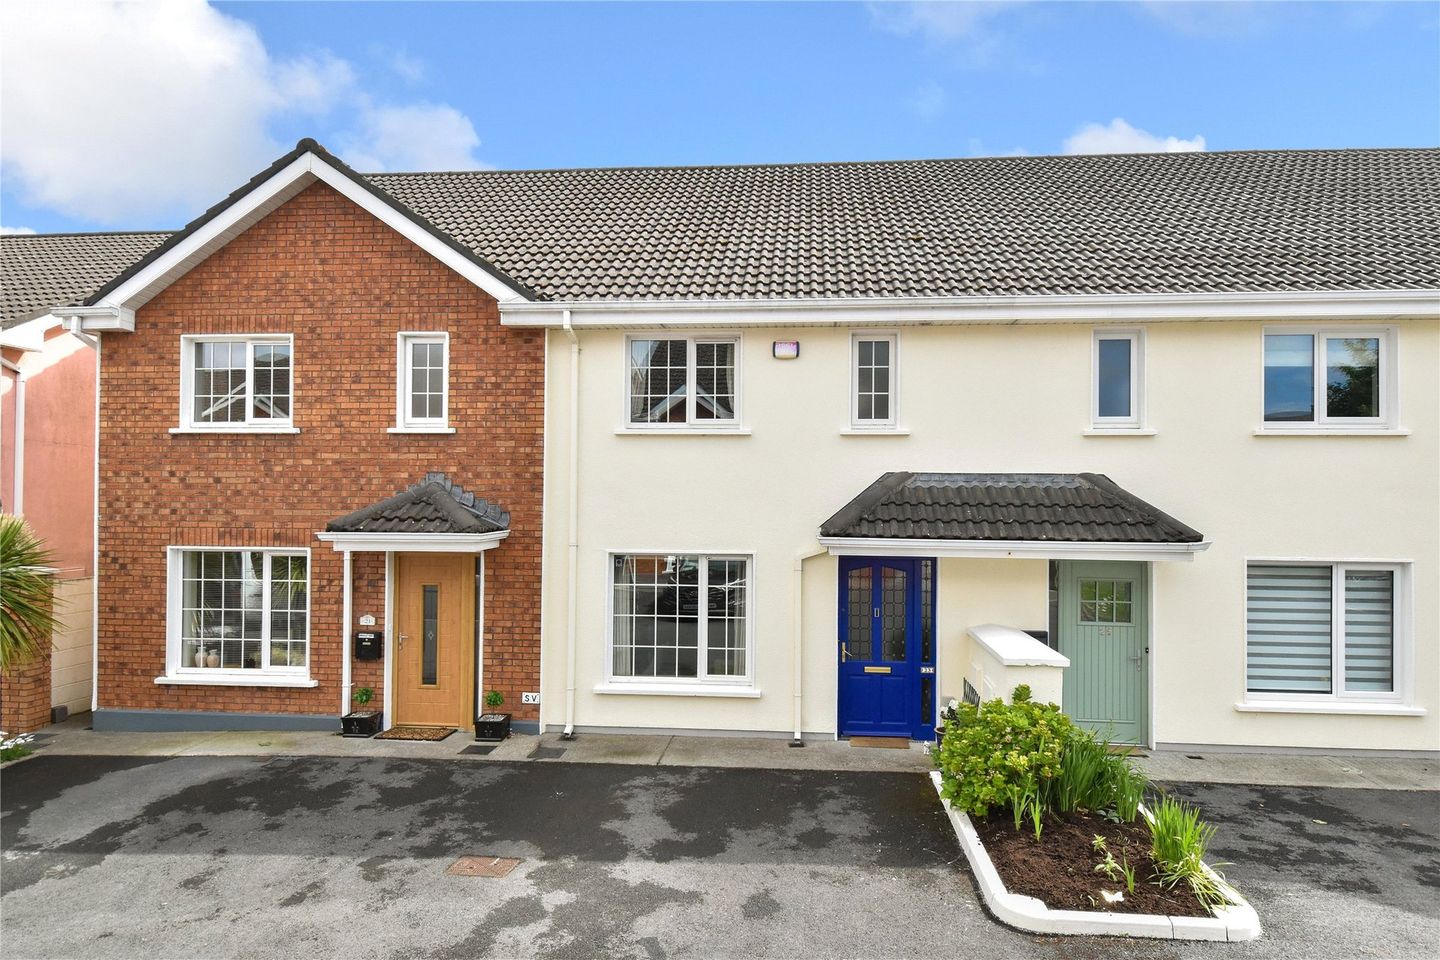 23 Bluebell Woods, Oranmore, Co. Galway